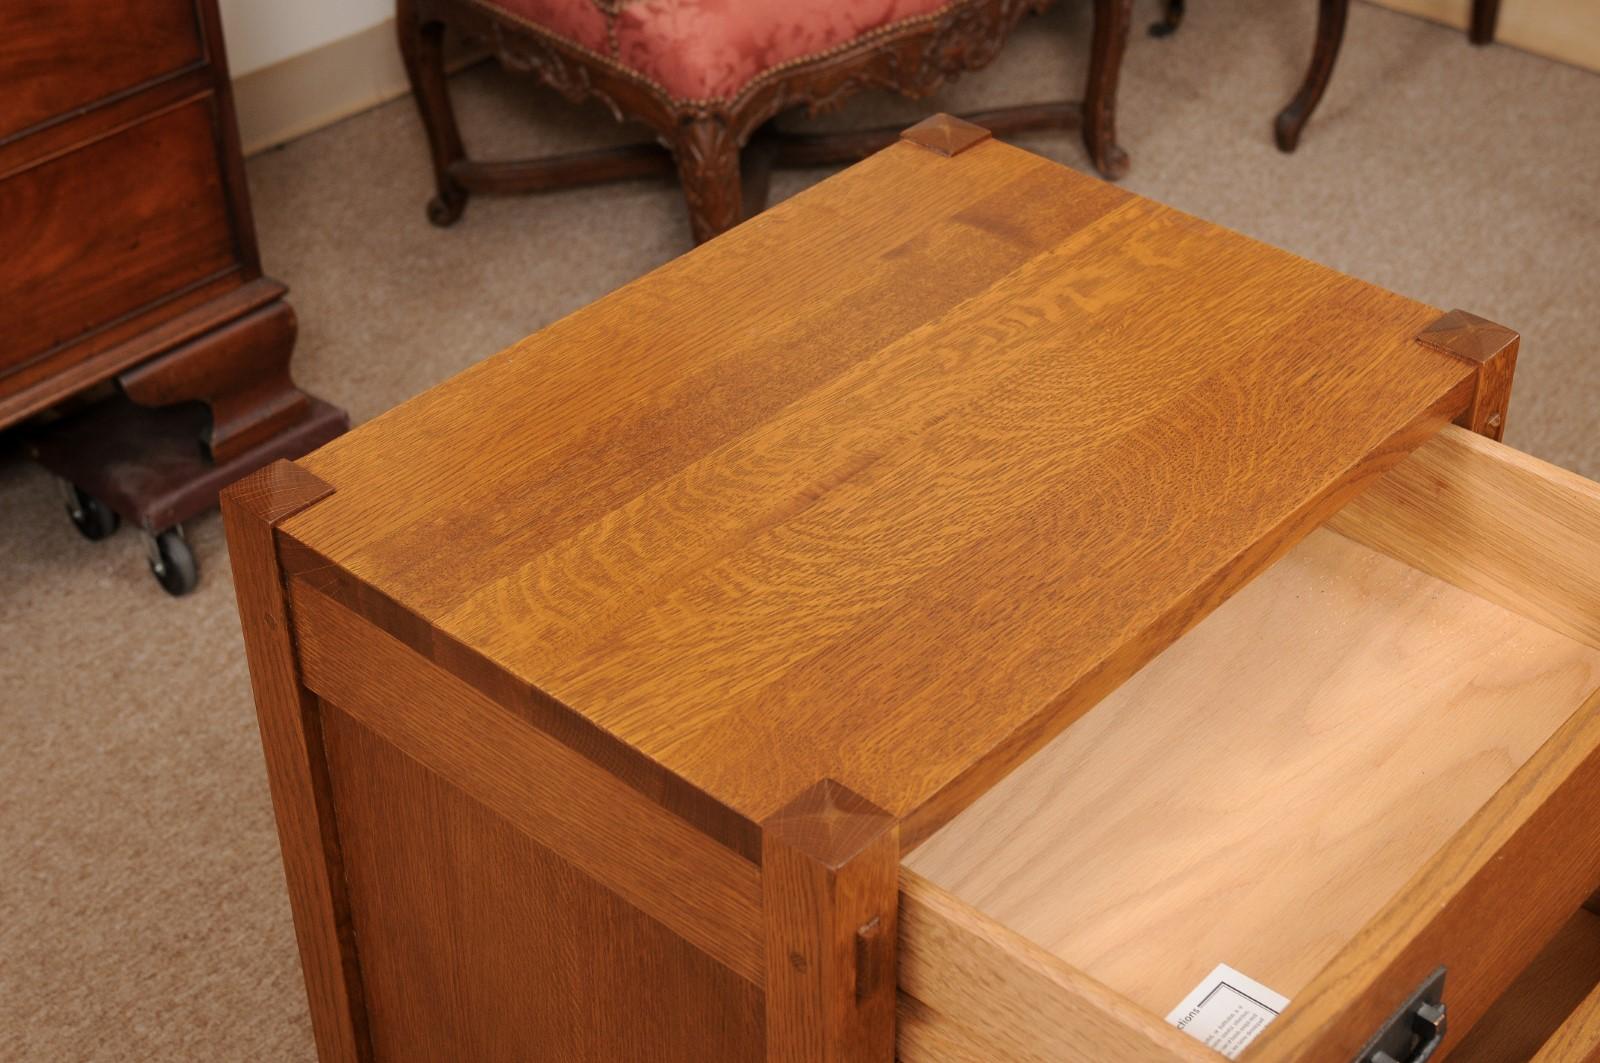 Pair of Stickley Mission Style Oak Nightstands / Side Tables with Drawers.